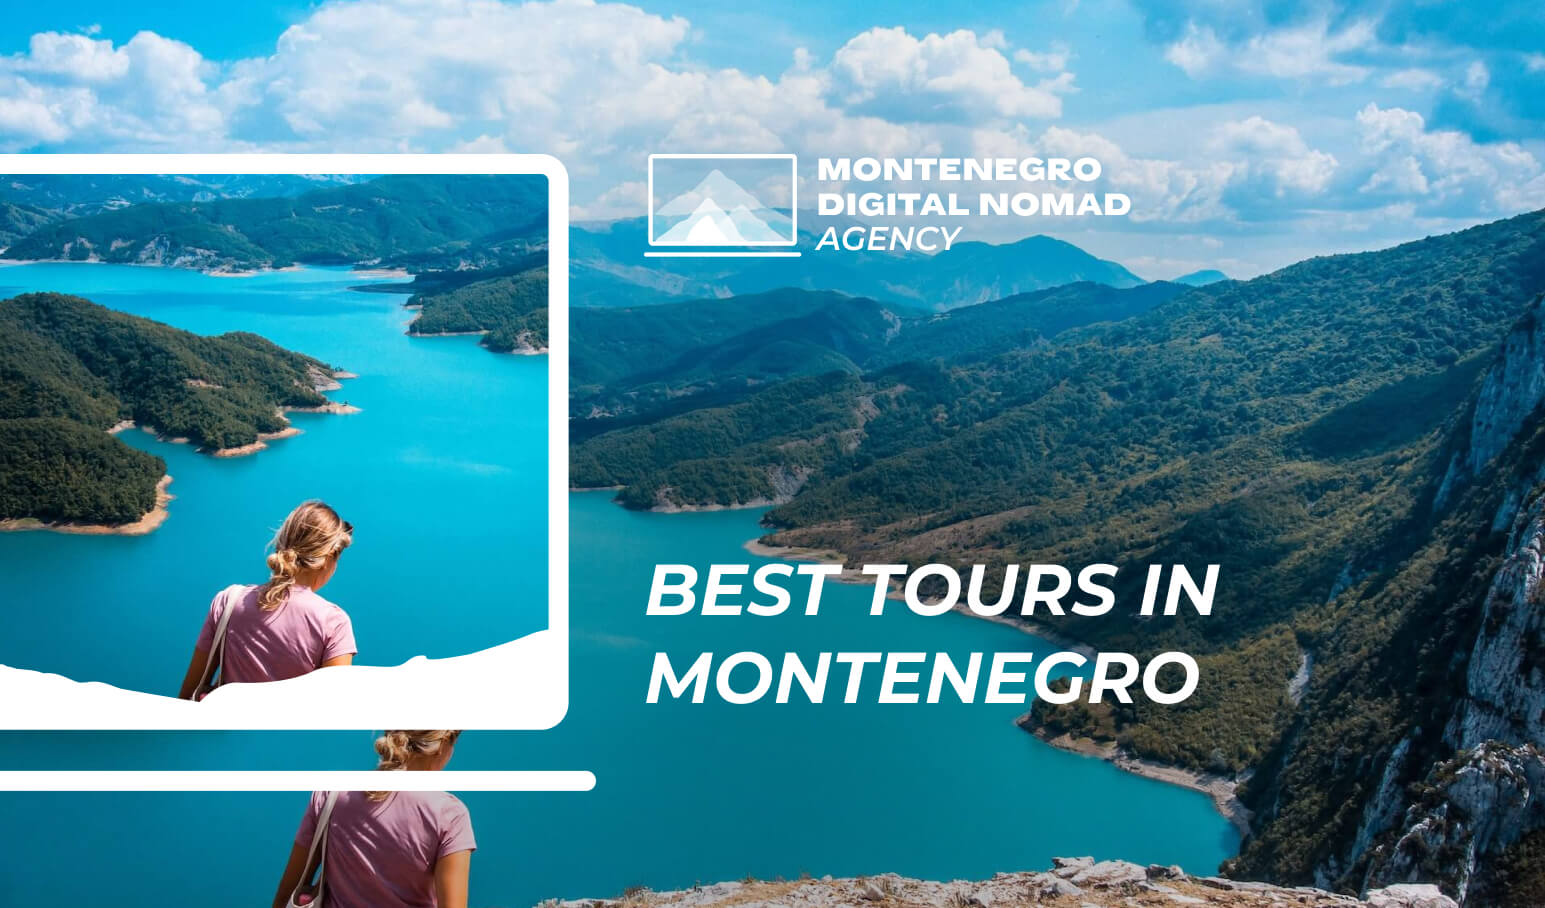 Photo of the spectacular view overlooking Kotor Bay with text overlay - Best Tours in Montenegro